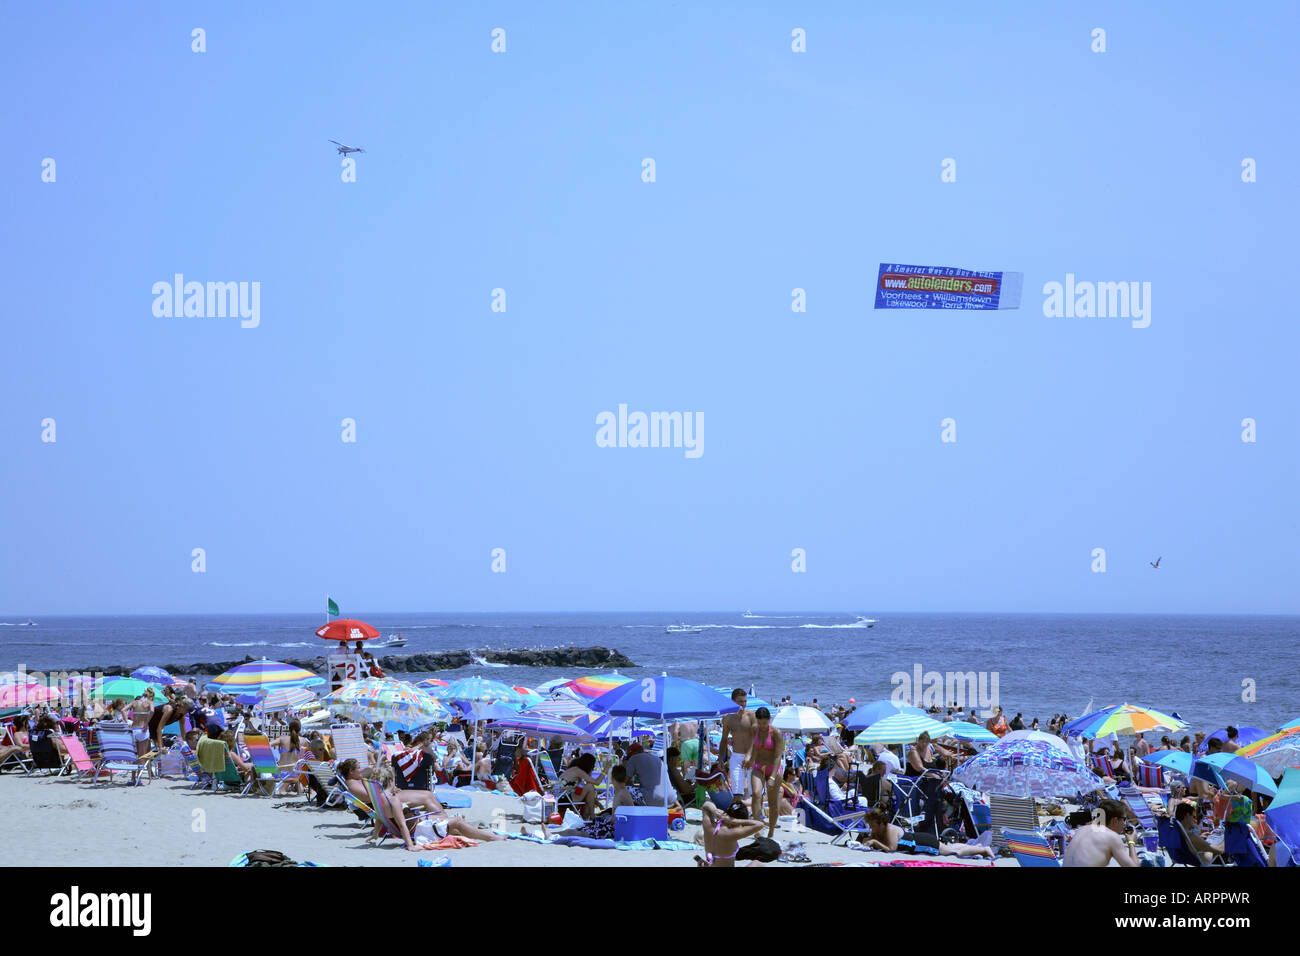 Mass of people amidst large colorful beach umbrellas with small plane dragging advertising banner parallel to shore over ocean. Stock Photo